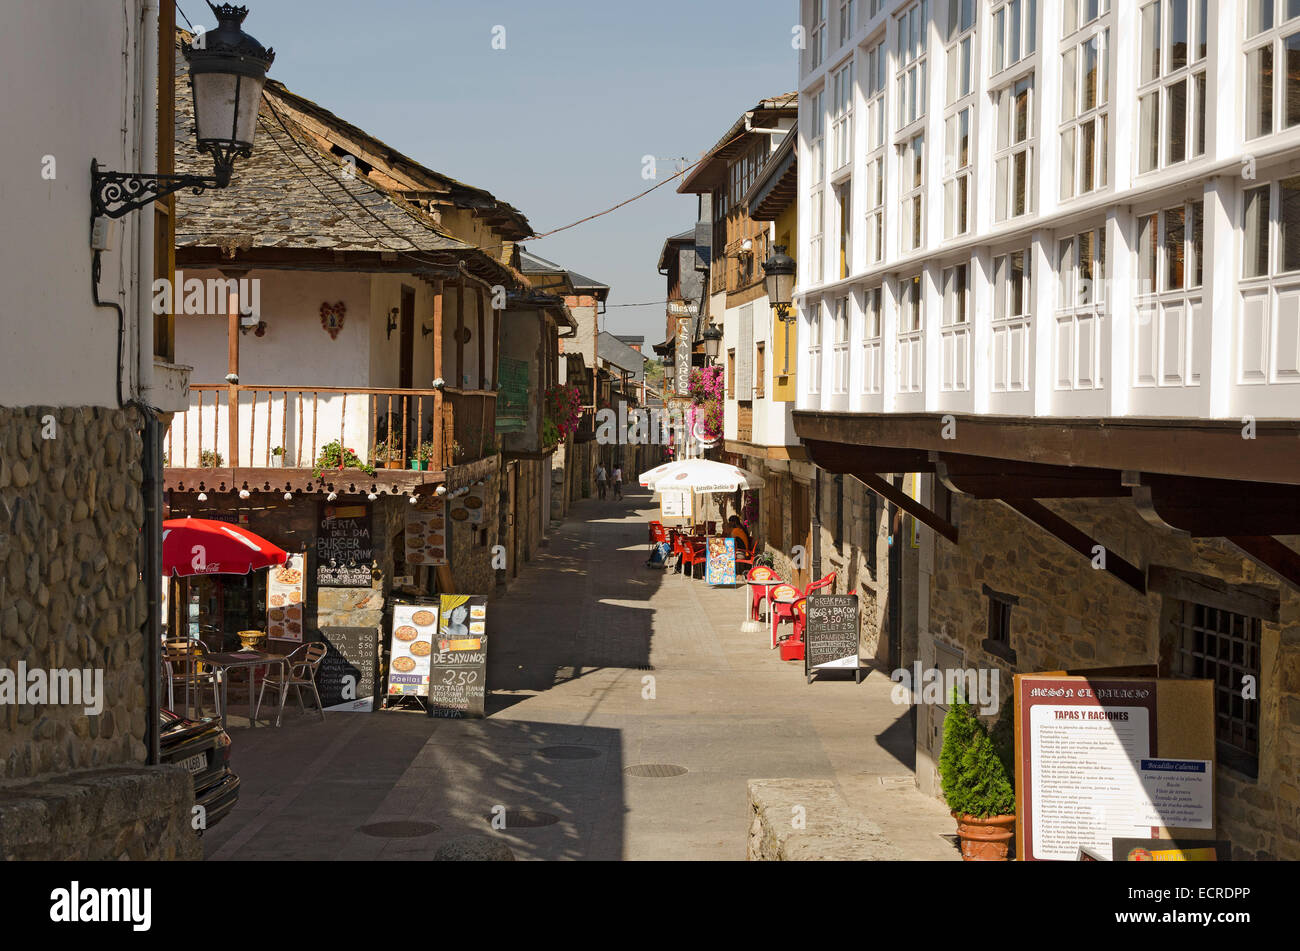 MOLINASECA, (LEON), SPAIN – SEPTEMBER 7, 2012: Restaurants, cafes and inns to serve to pilgrims on their way to Santiago de Comp Stock Photo